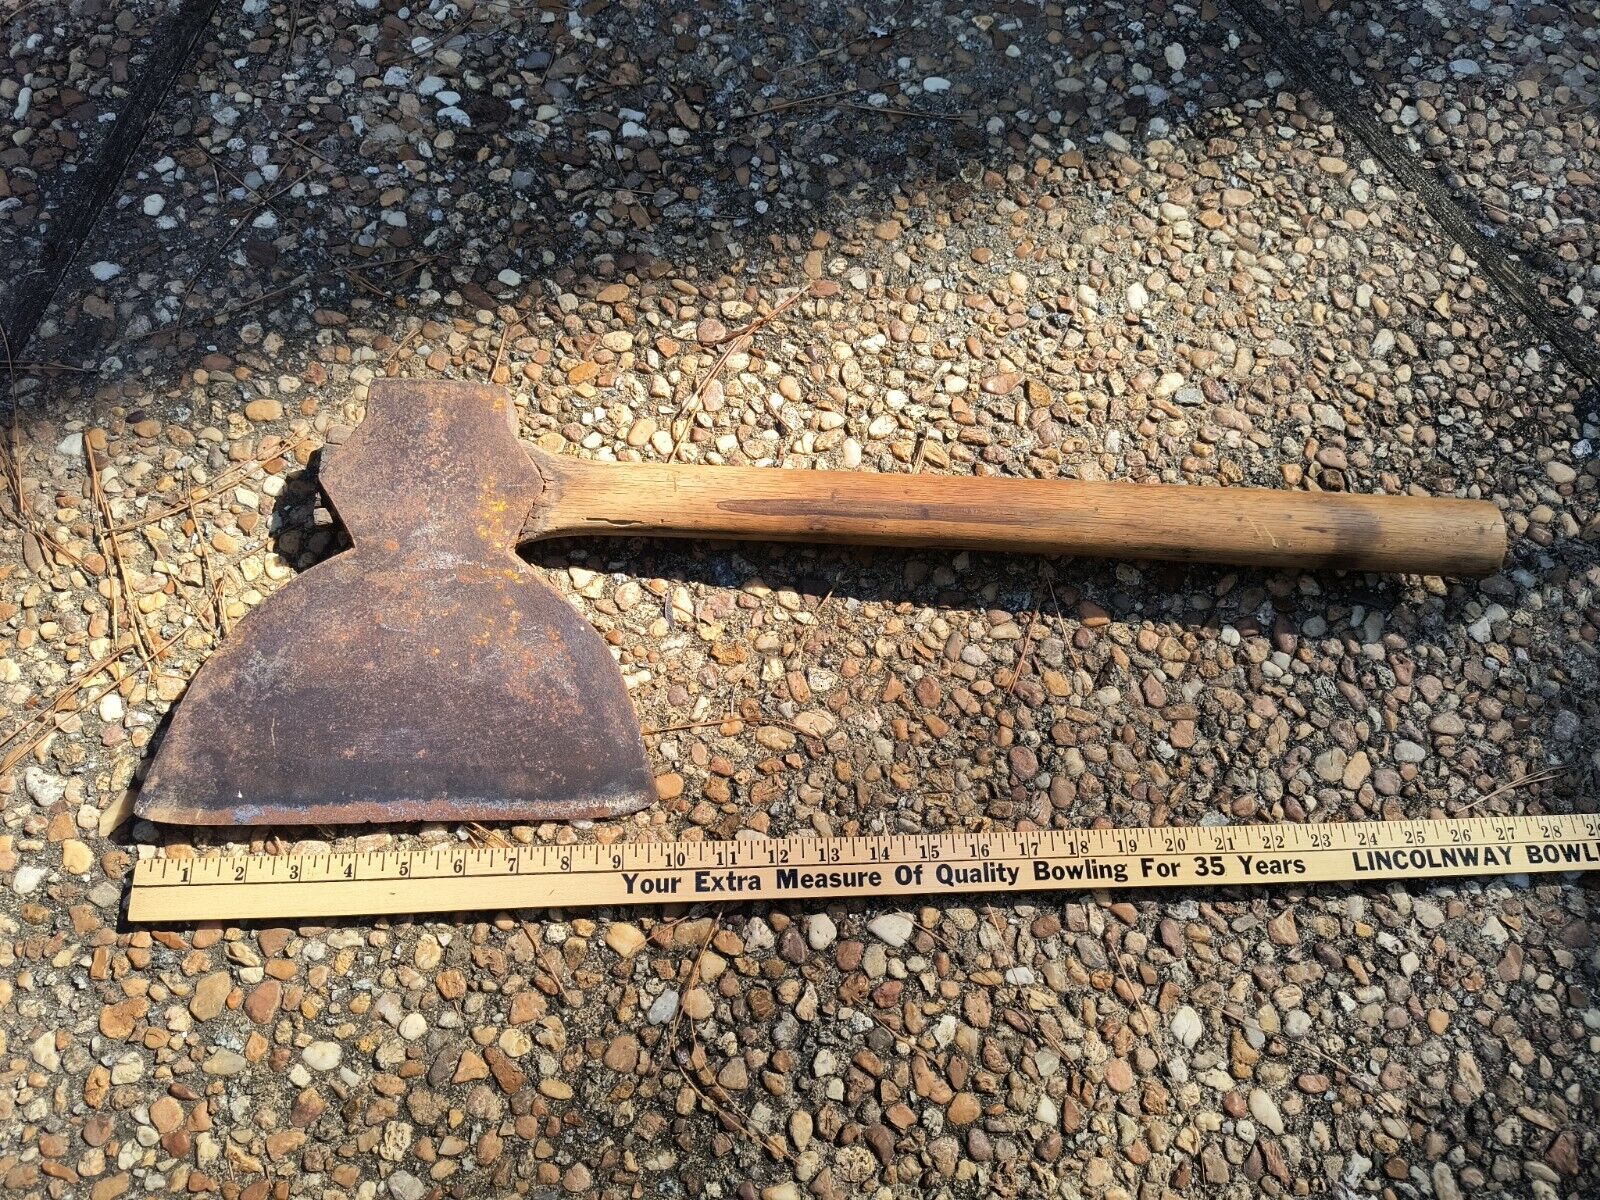 ANTIQUE LARGE HEWING BROAD AXE TIMBER FRAMING TOOL 9.75x9